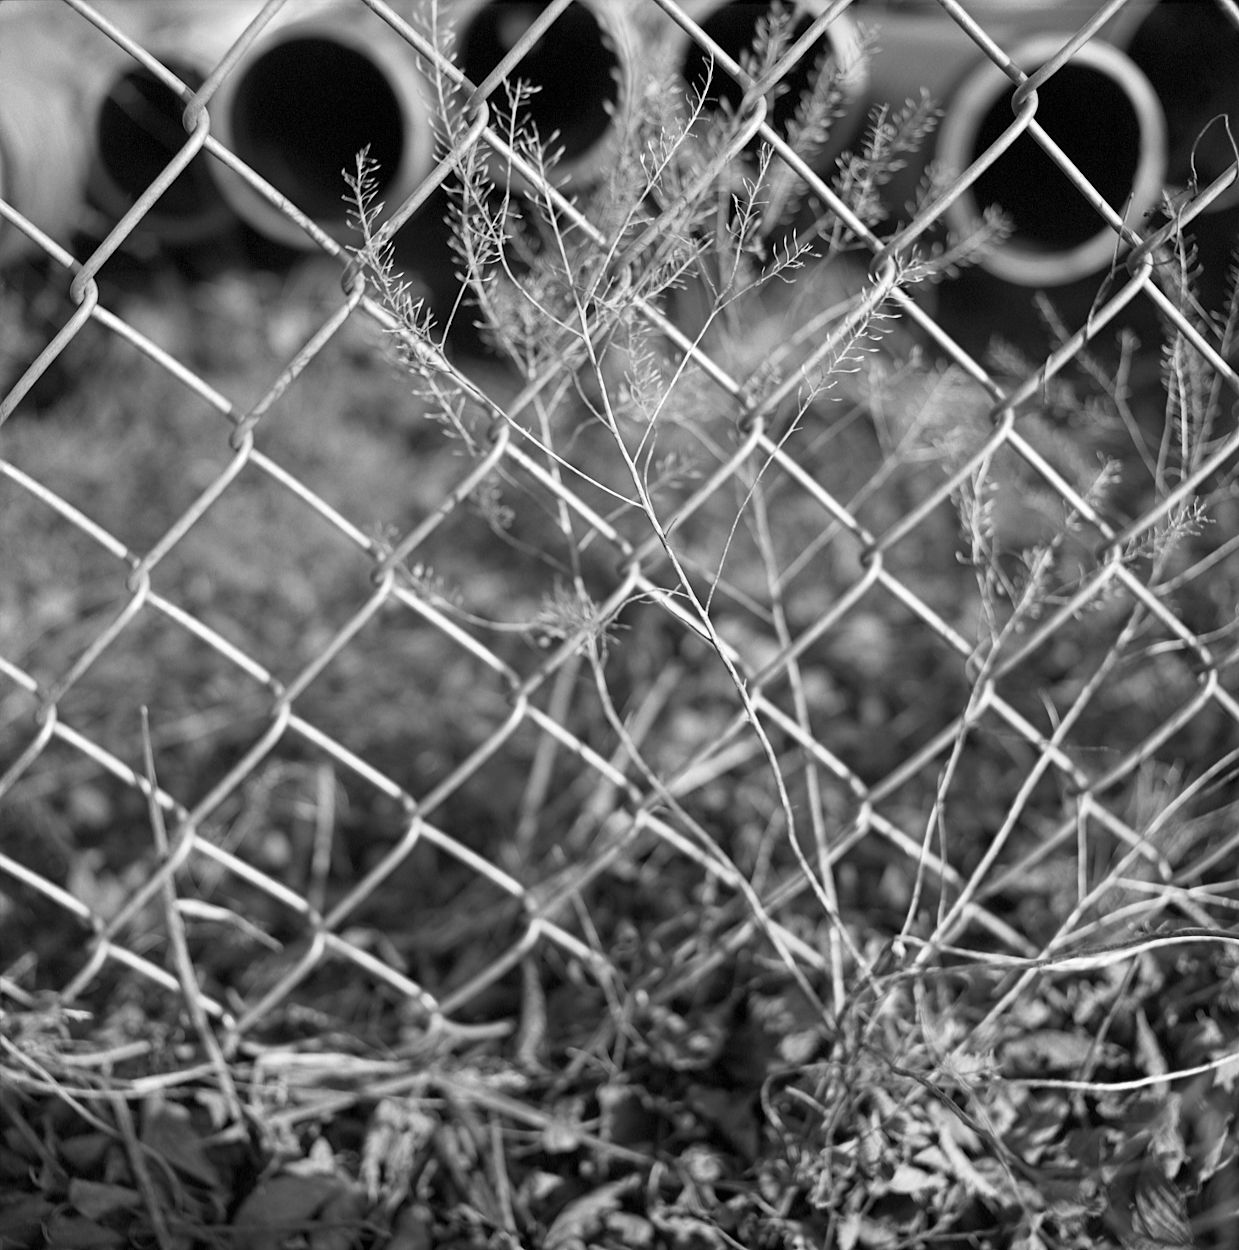 A dormant plant split between a chain link fence.